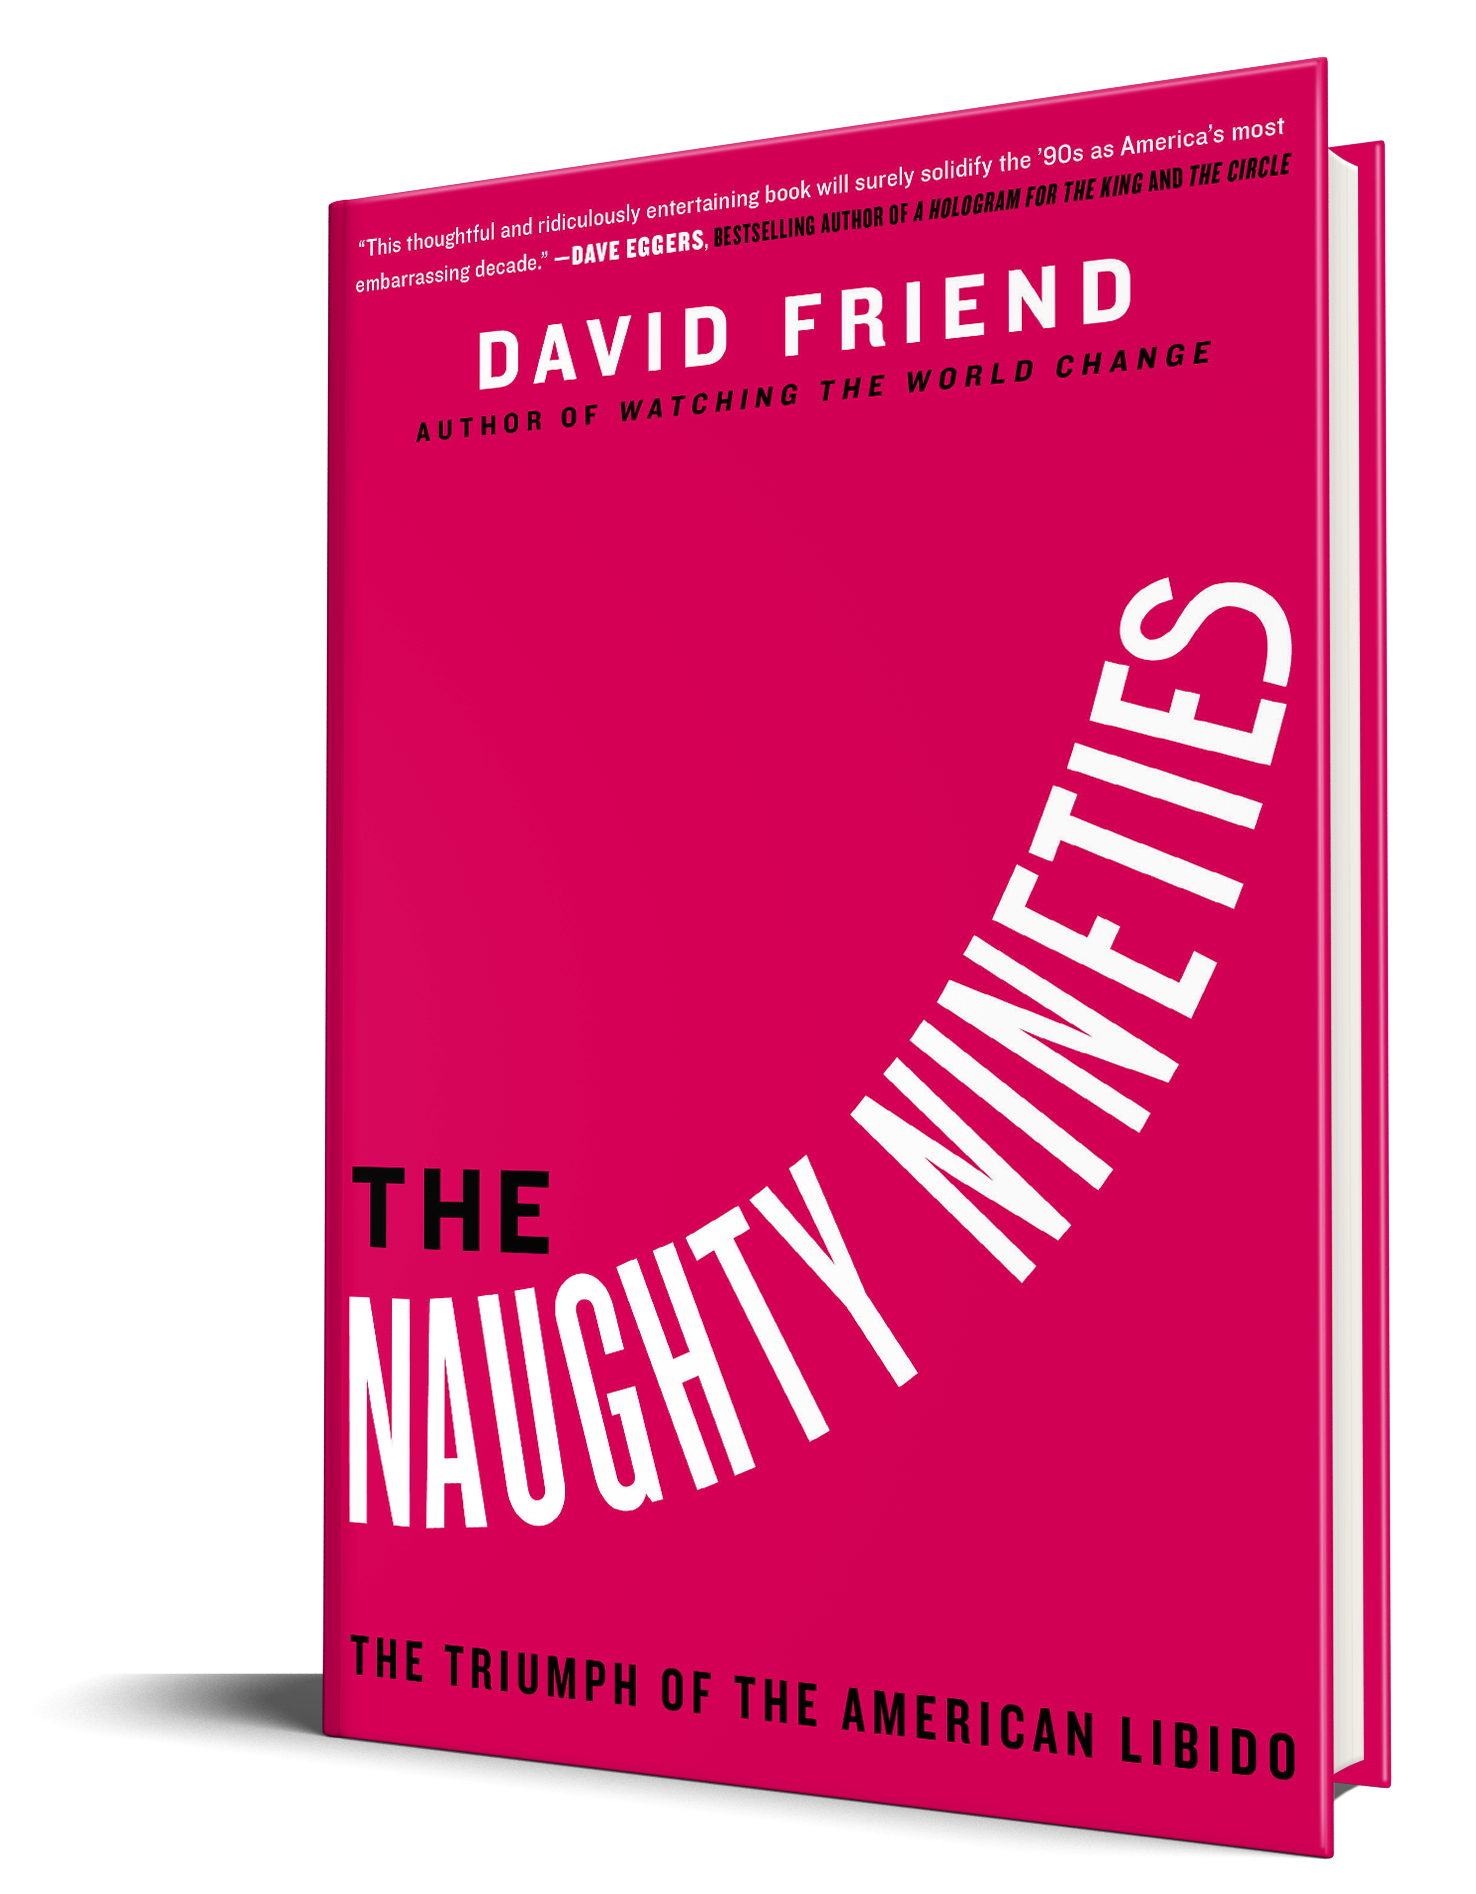 Friday Reads: The Naughty Nineties: The Triumph of the American Libido by David Friend